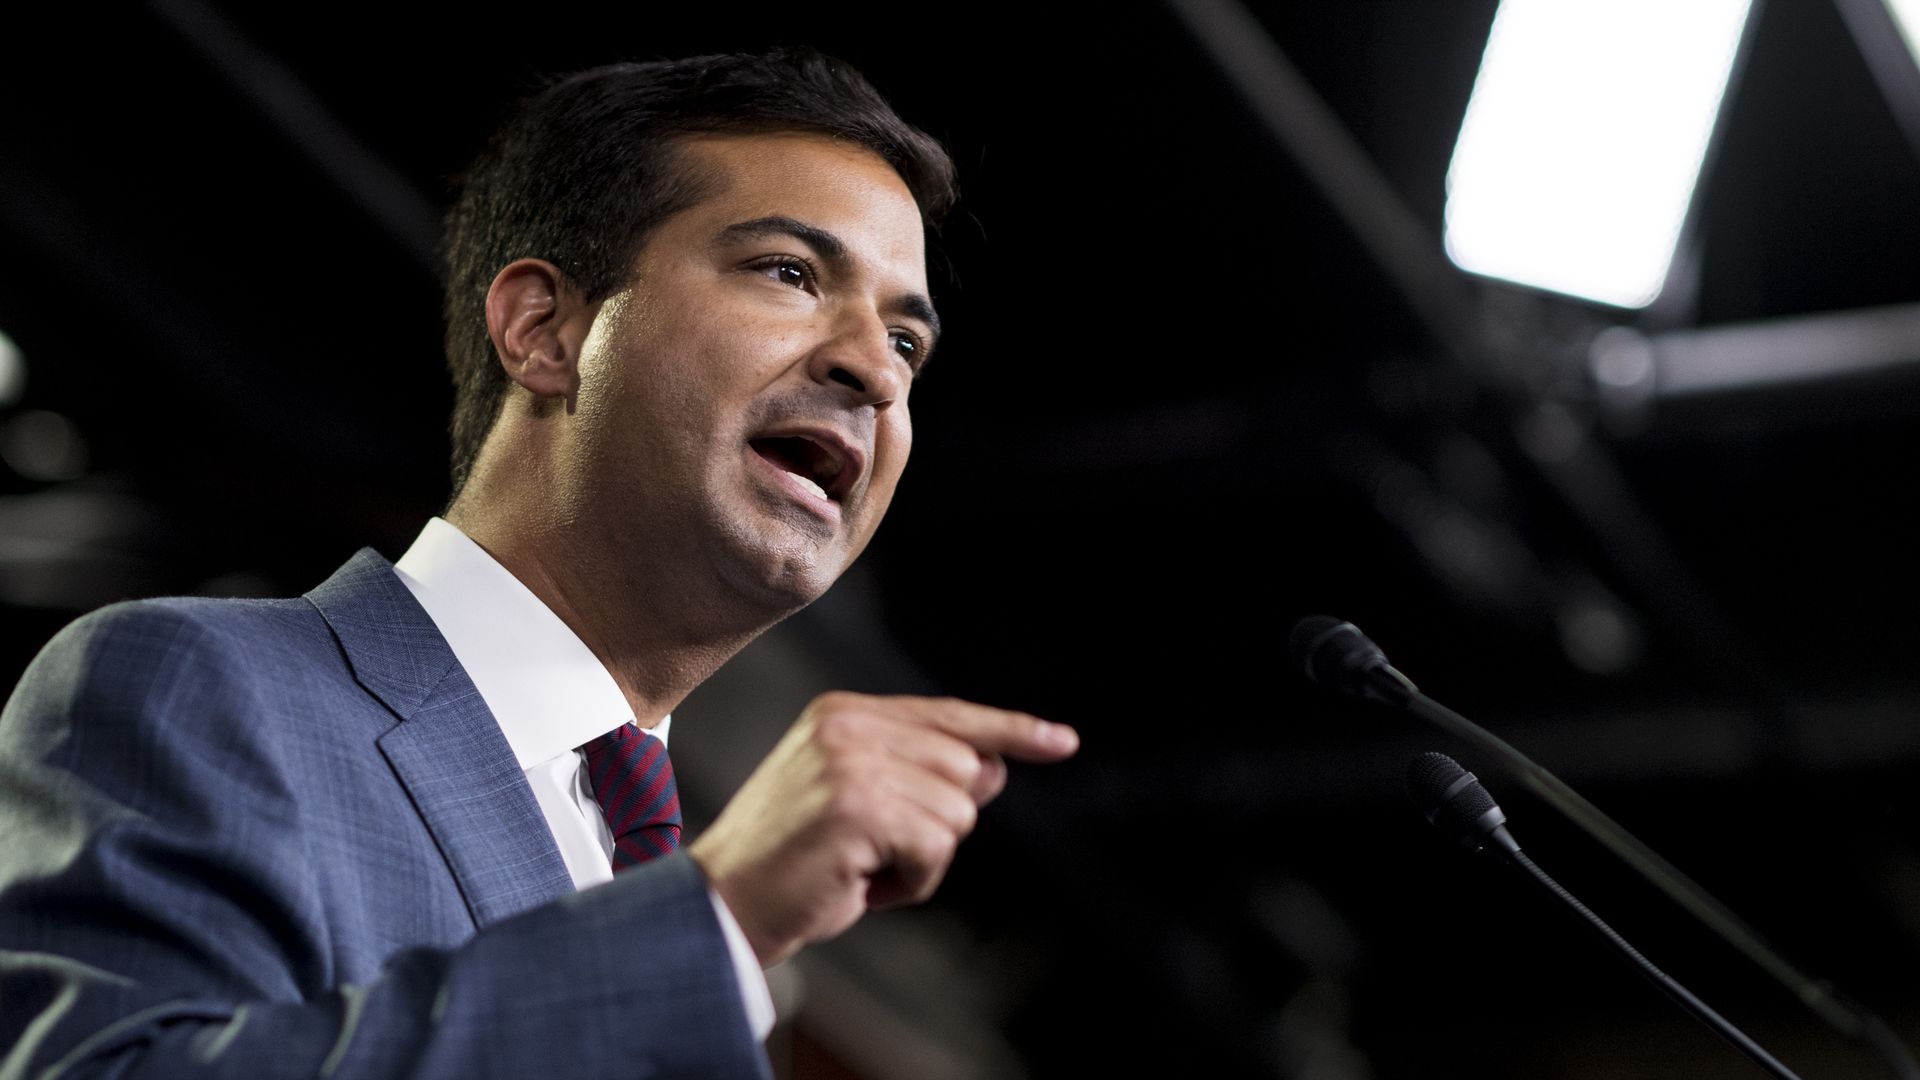 Carlos Curbelo speaking at a press conference.